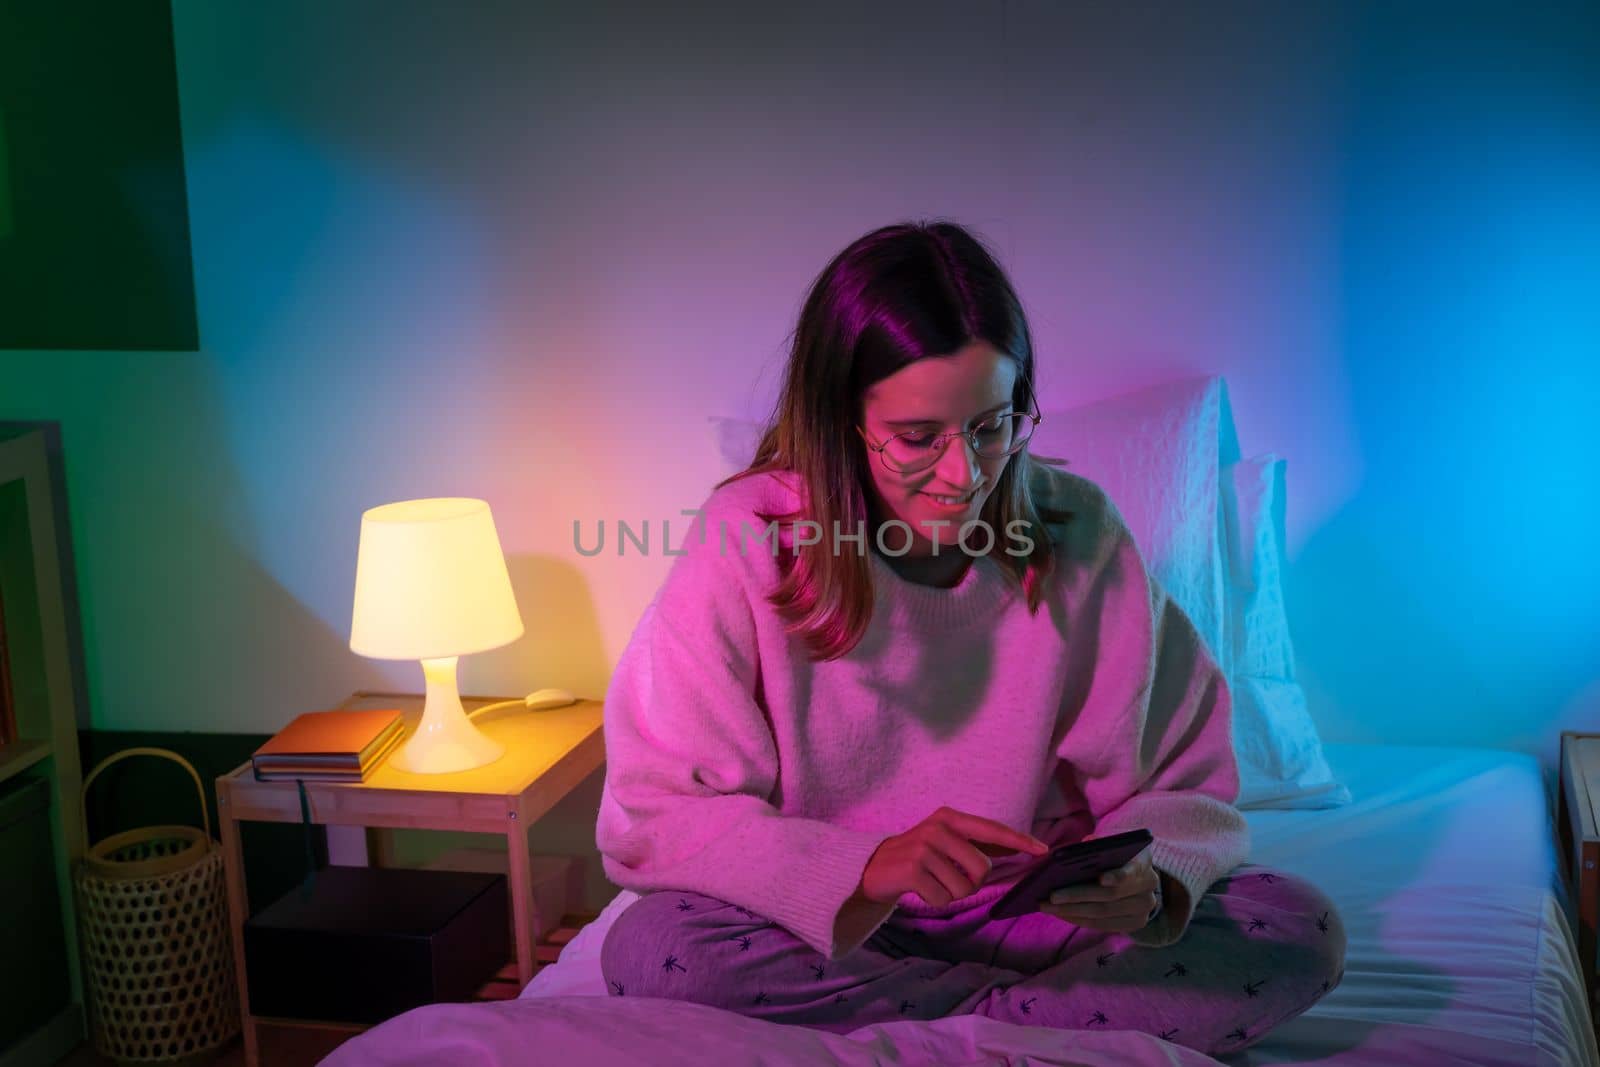 Beautiful young girl looking her phone on bed with neon colors room. Technology at bed concept. by PaulCarr